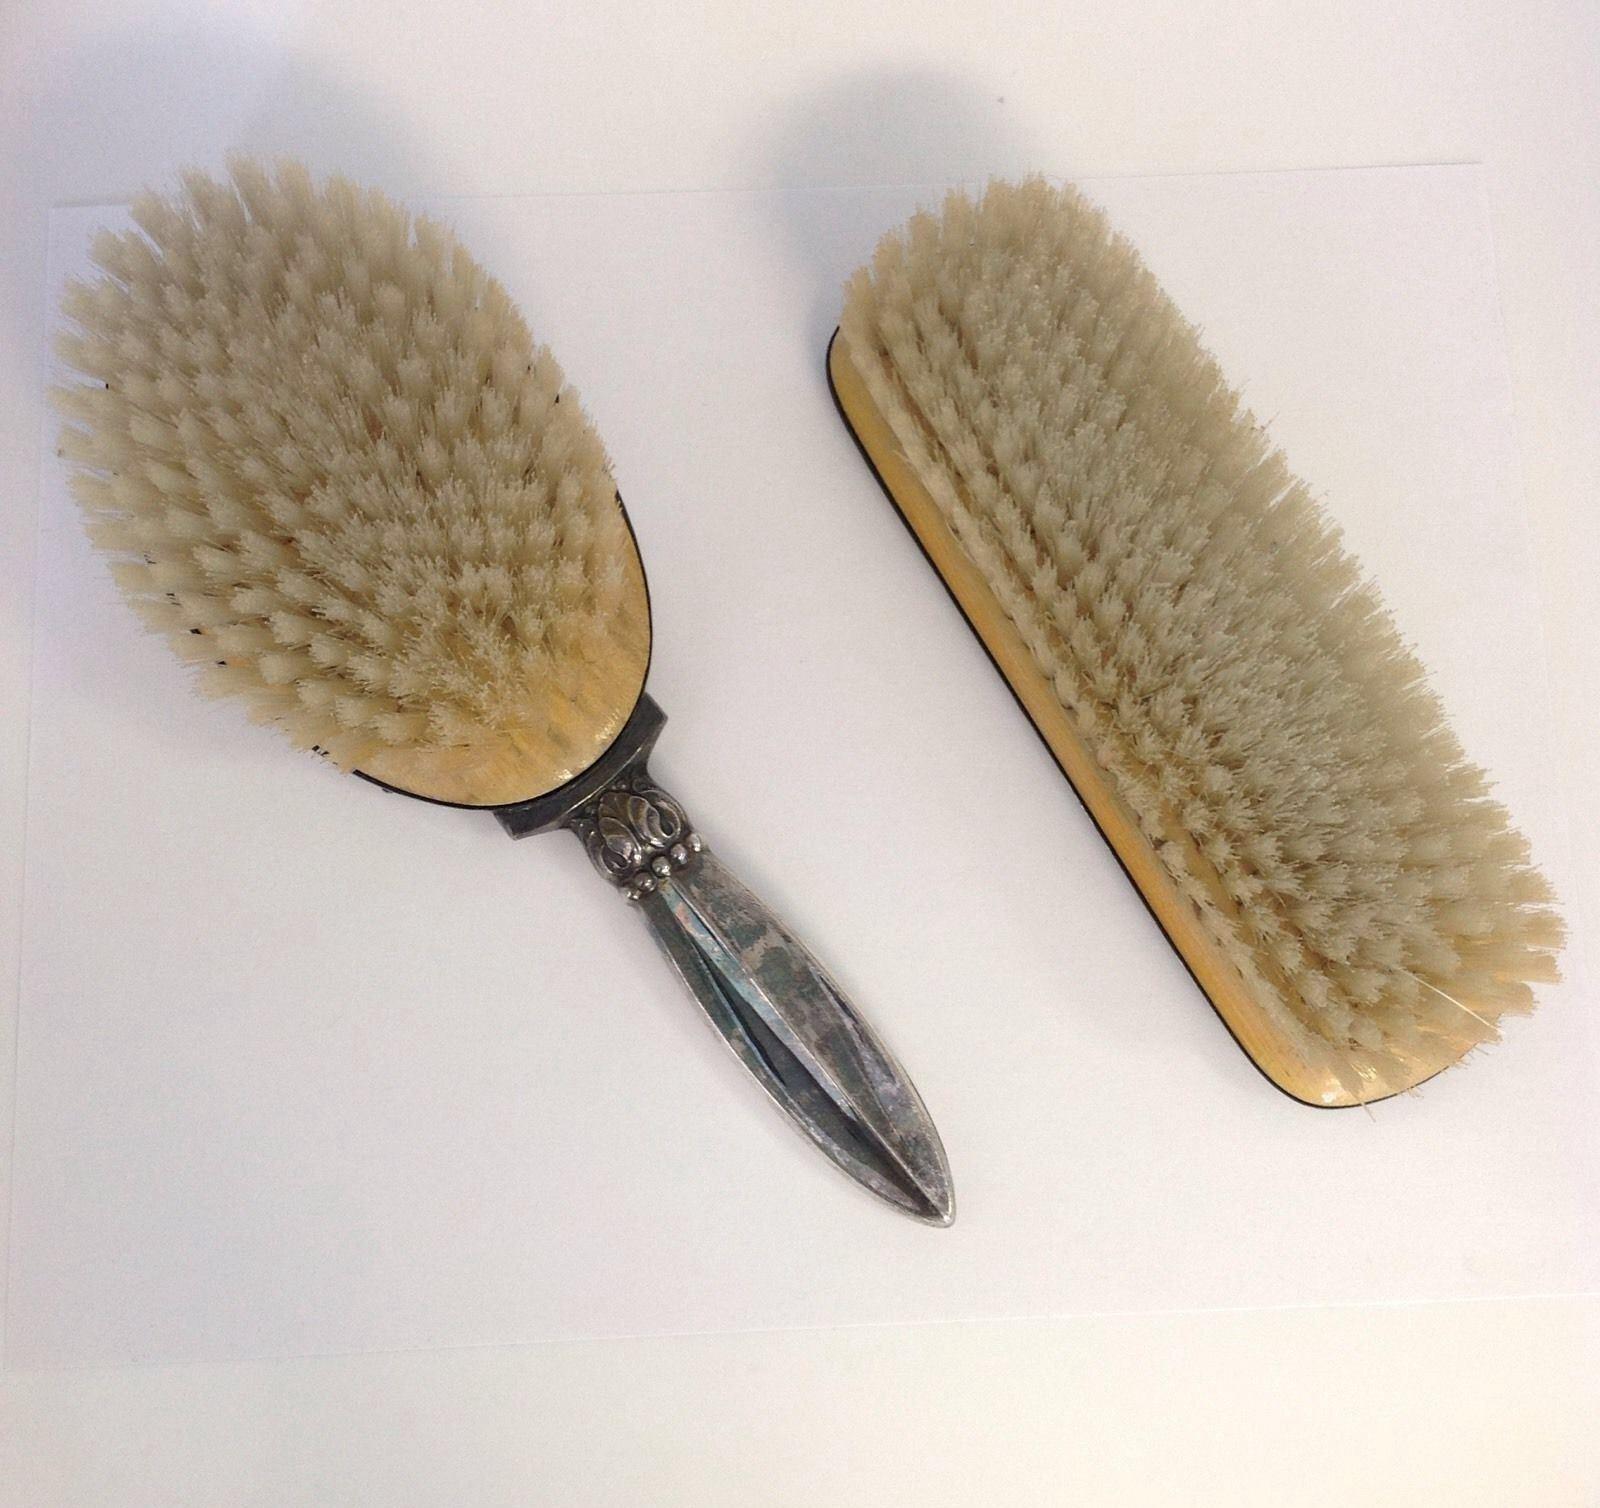 Vintage Hans Jensen Danish silver plated brush set - one hair brush and one clothes brush. 
No monogram. Marking: S & F 297 DENMARK. 
Measures: Hair brush is a total length of 8 7/8